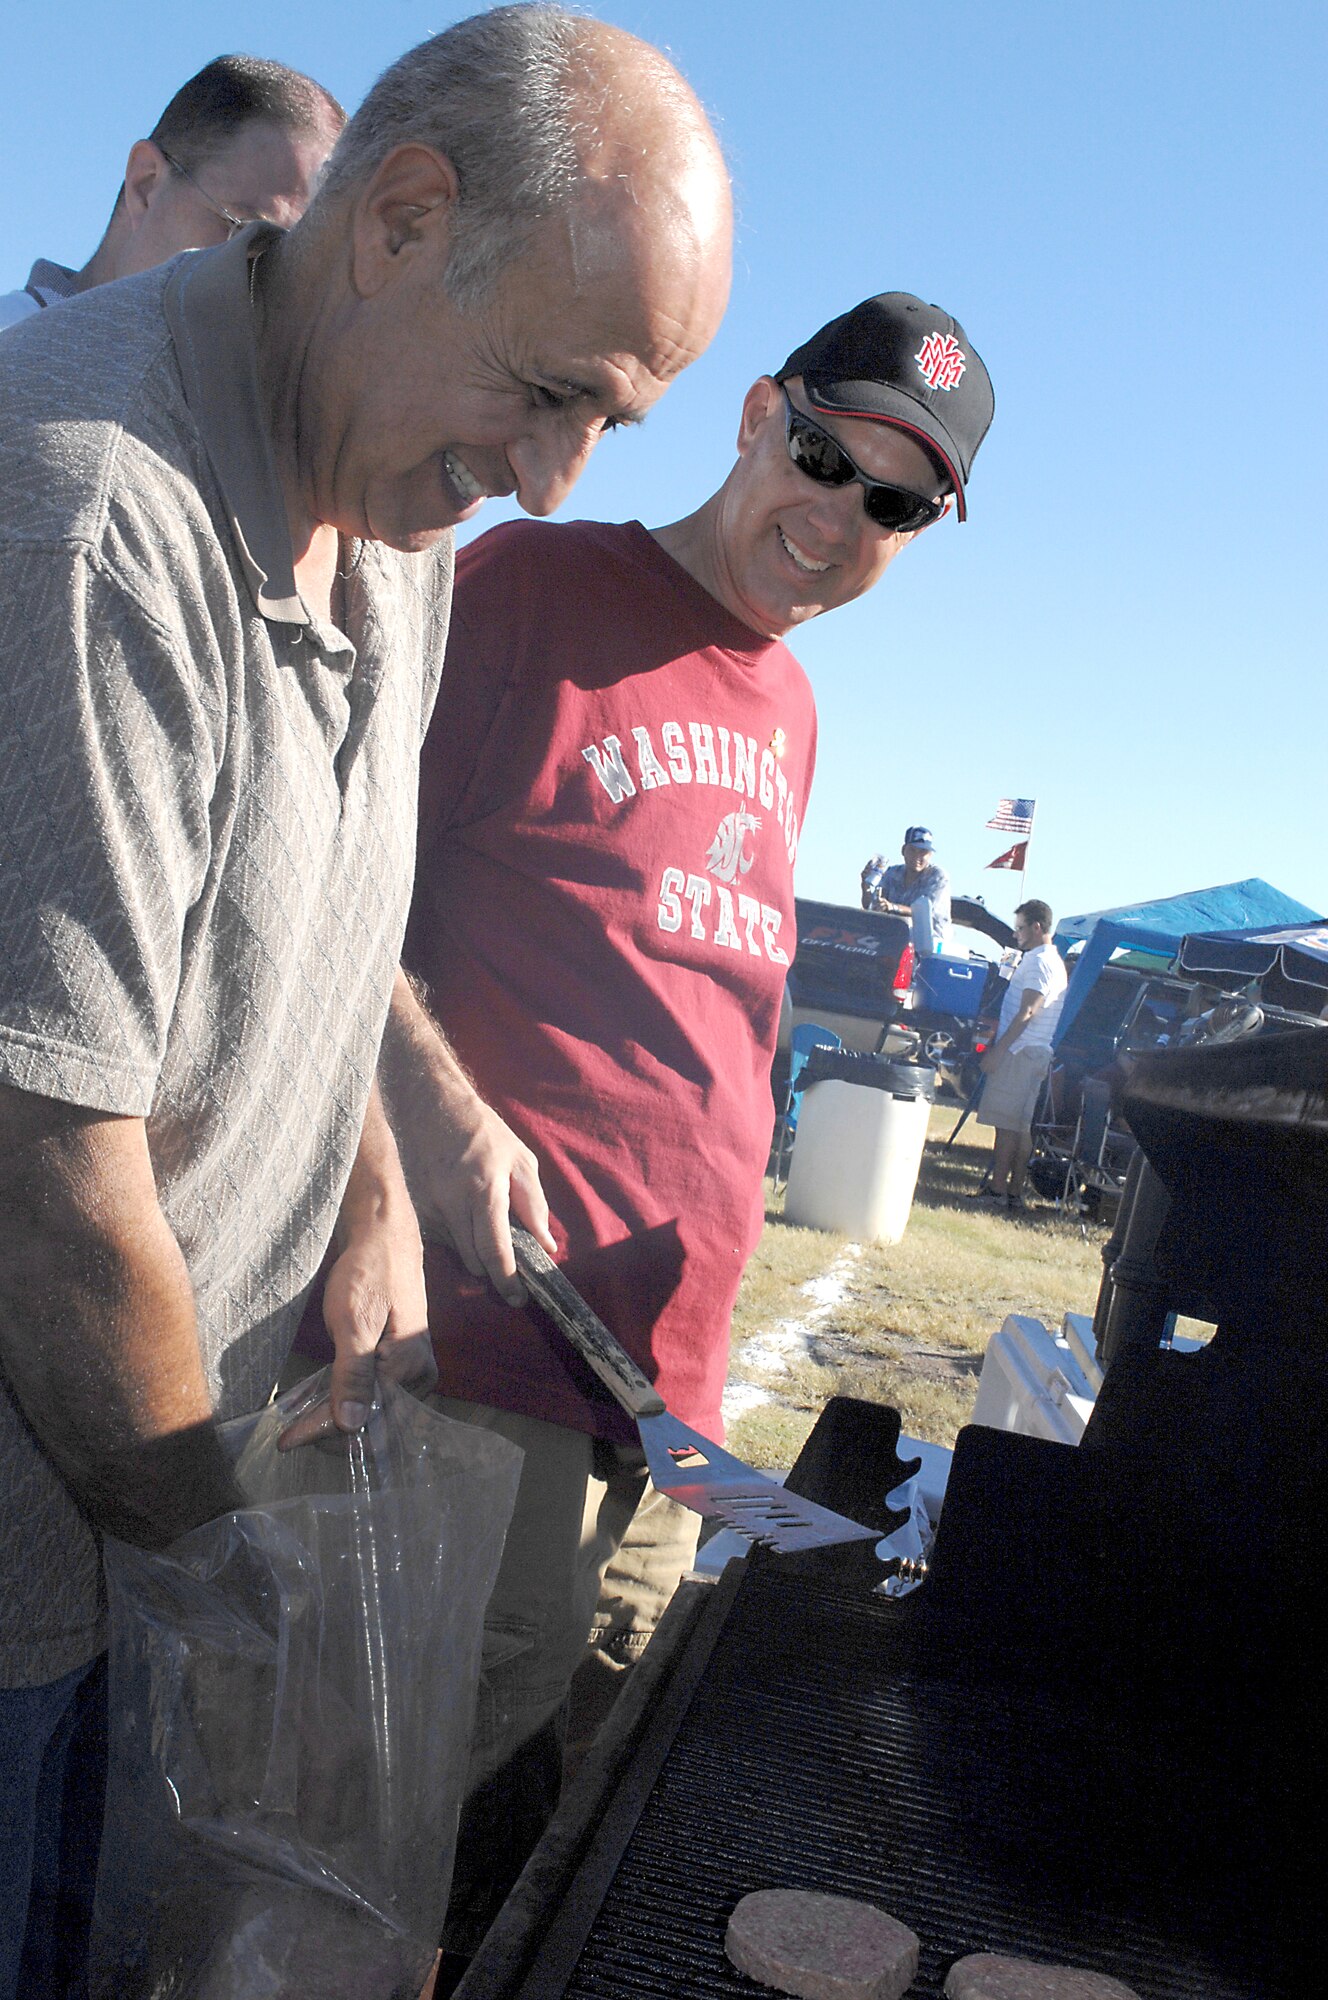 Juan Mejia, 49th Operations Group secretary, and Senior Master Sgt. Scott Thomsen, 49 OG, put burgers on the grill during the tailgate party before the New Mexico State University game against San Jose State at NMSU, October 18. The 49 OG from Holloman Air Force Base, N.M., hosted the party for Team Holloman Airmen, family and friends. (U.S. Air Force photo/Airman Sondra M. Escutia)